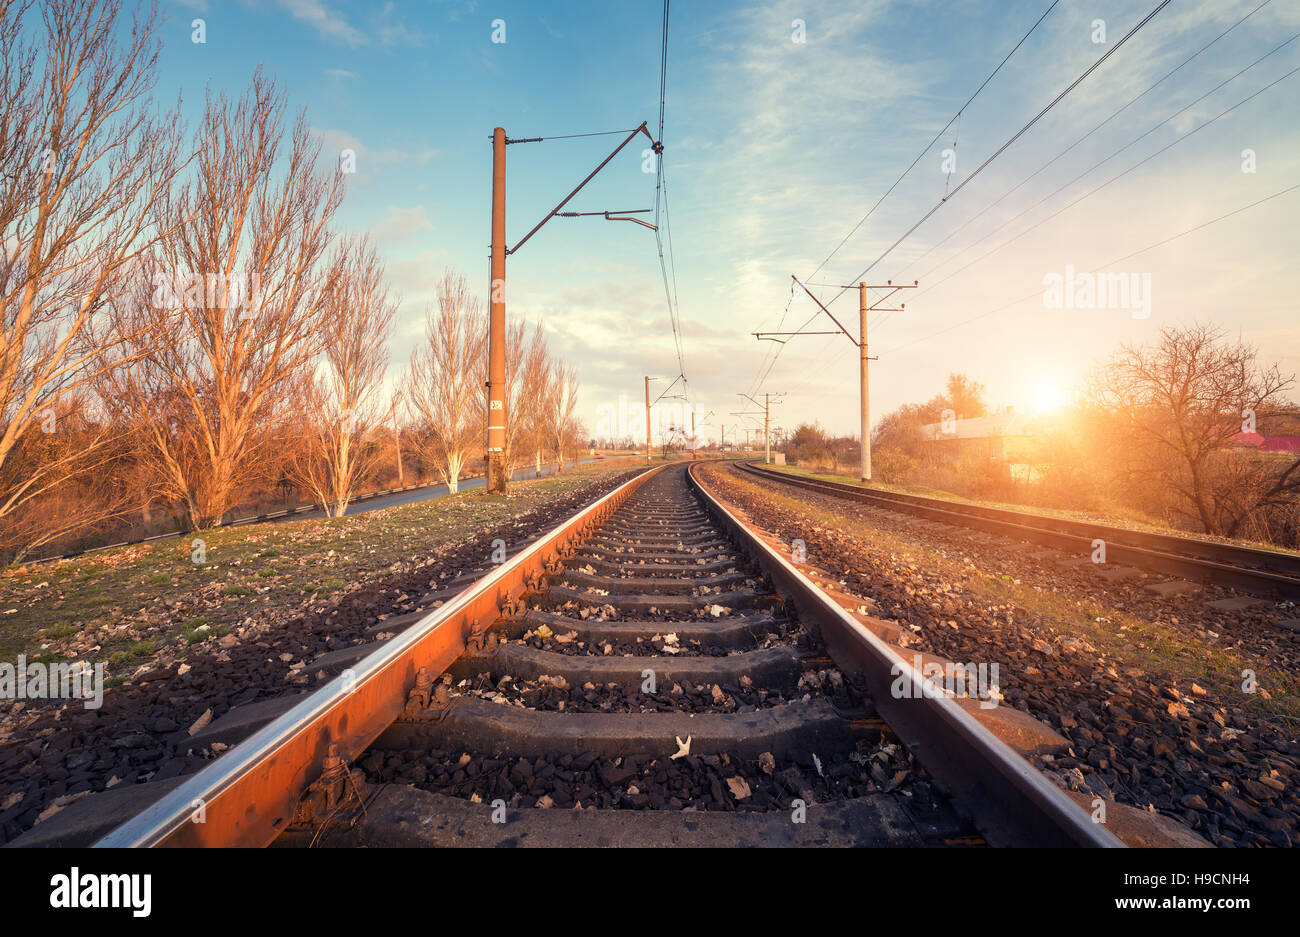 Railway station against beautiful sky at sunset. Industrial landscape with railroad, blue sky. Railway junction Stock Photo